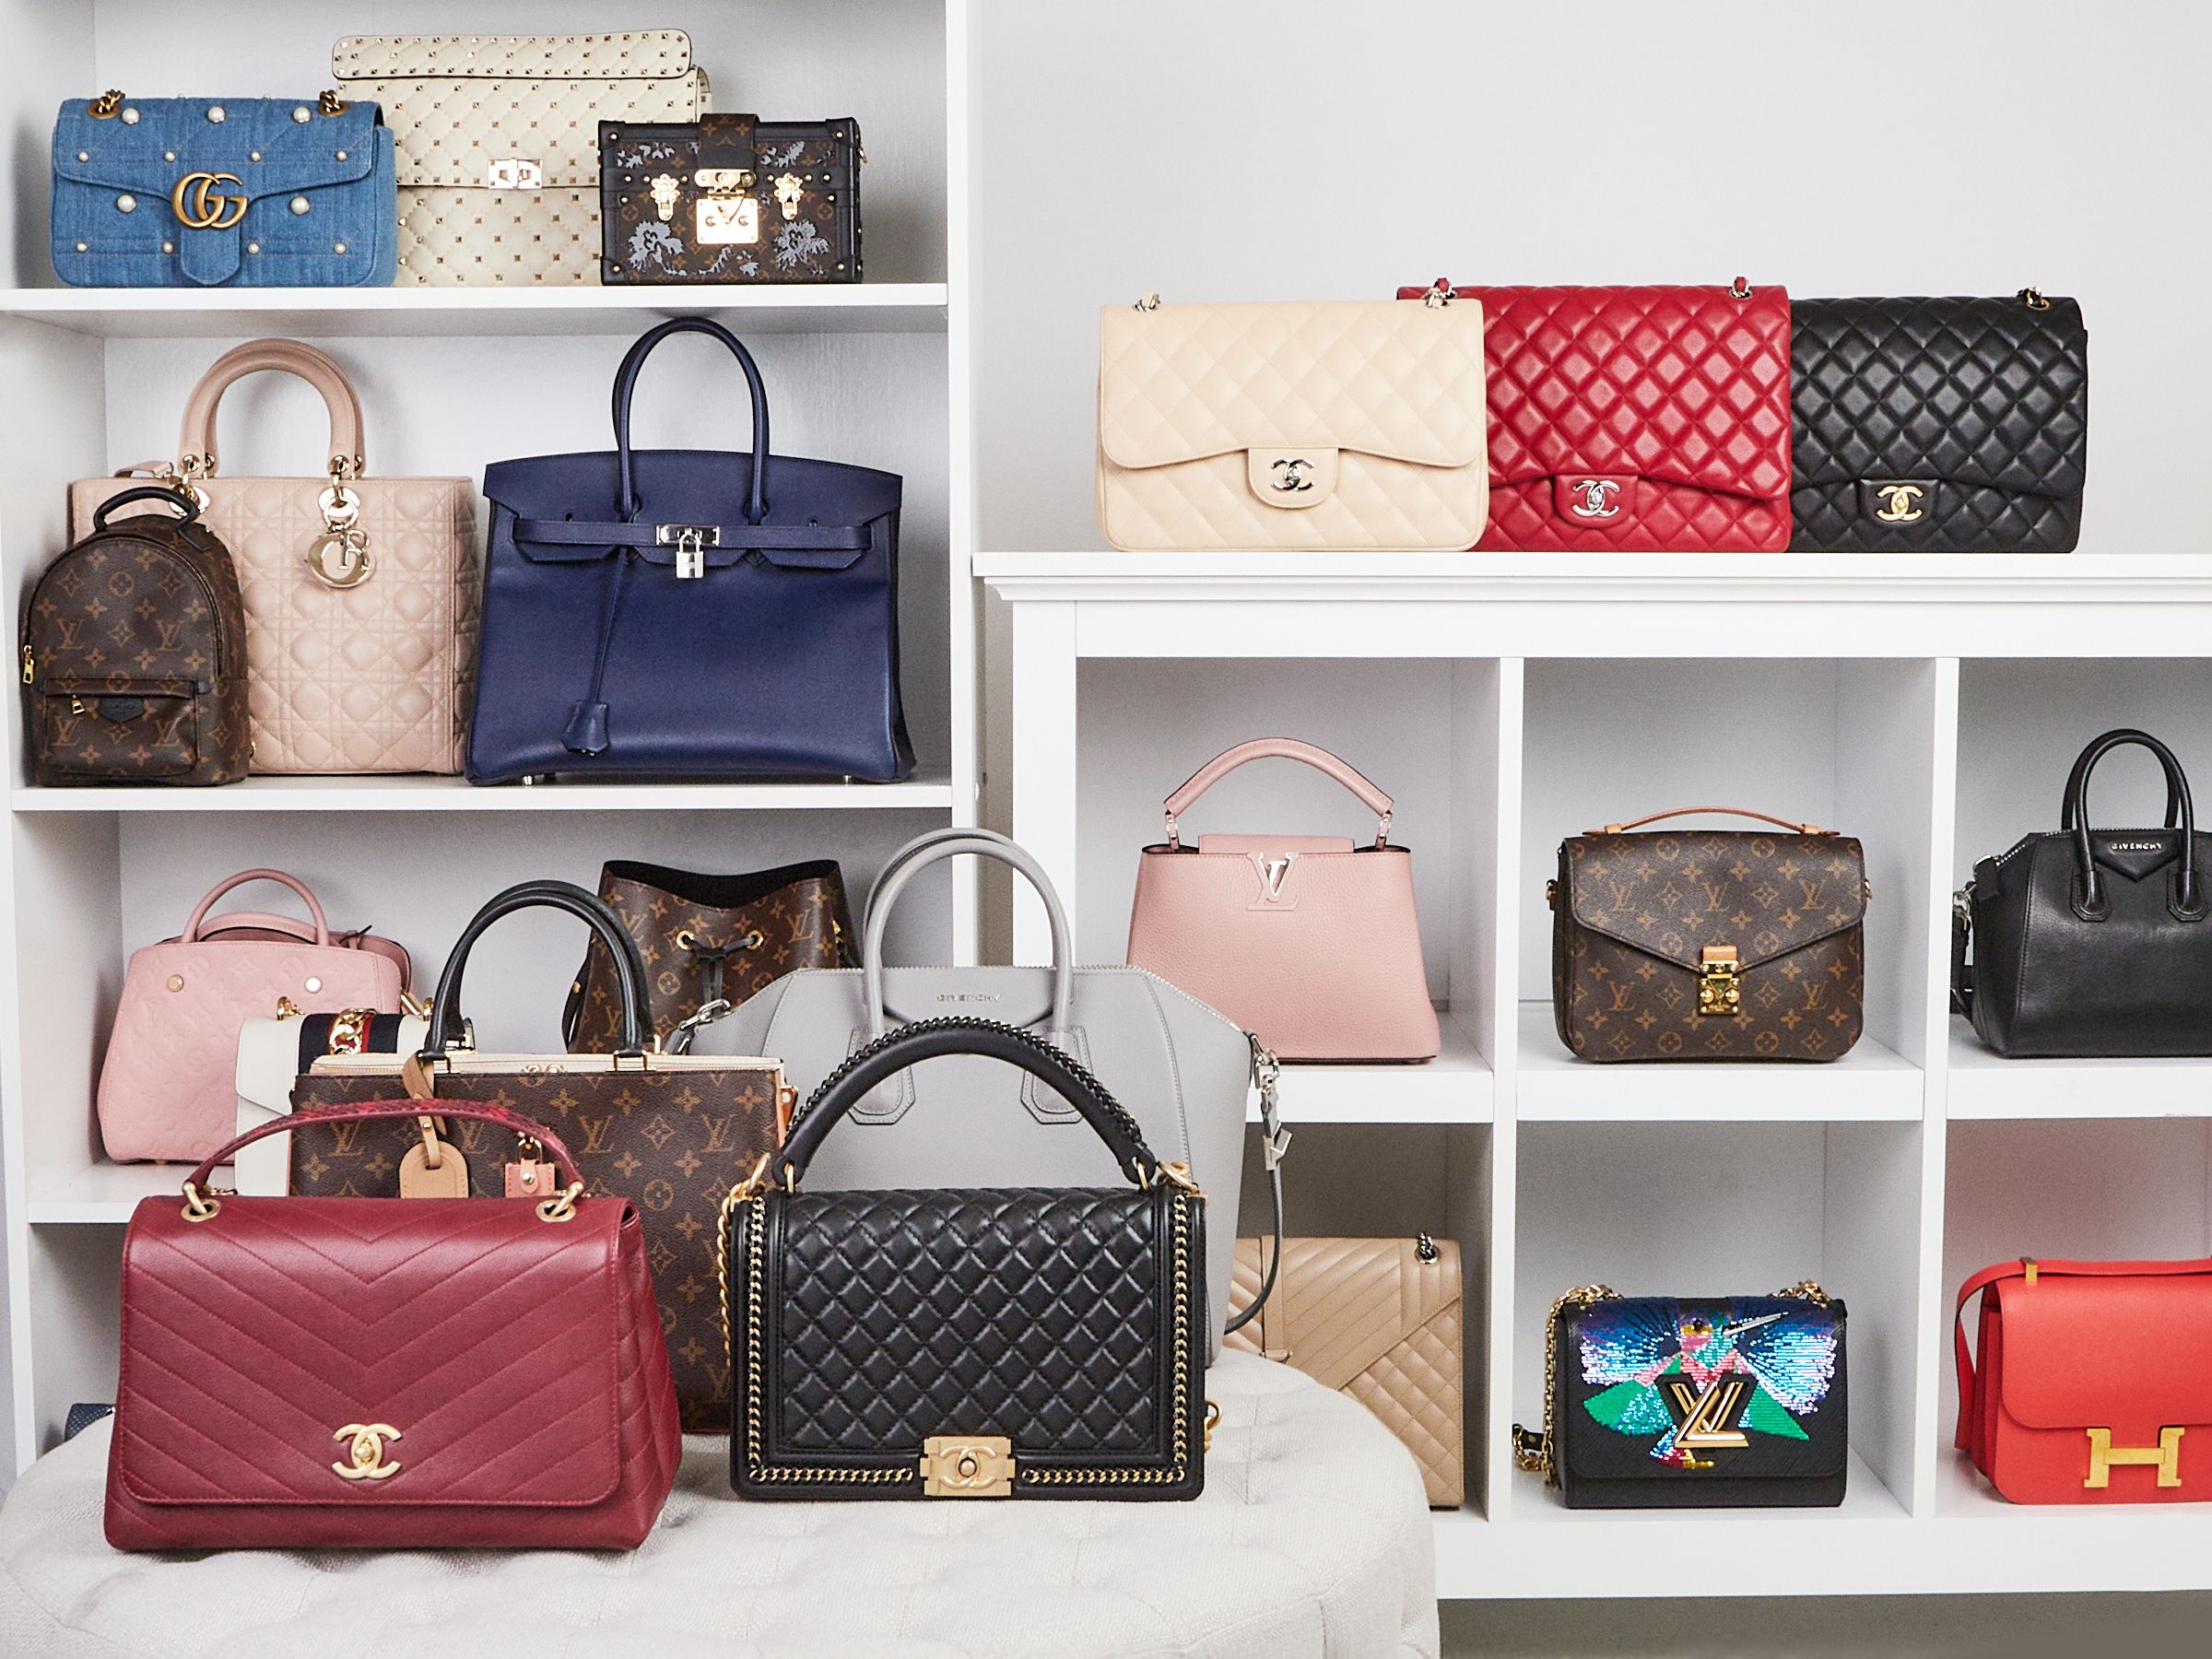 luxury bags of different brands